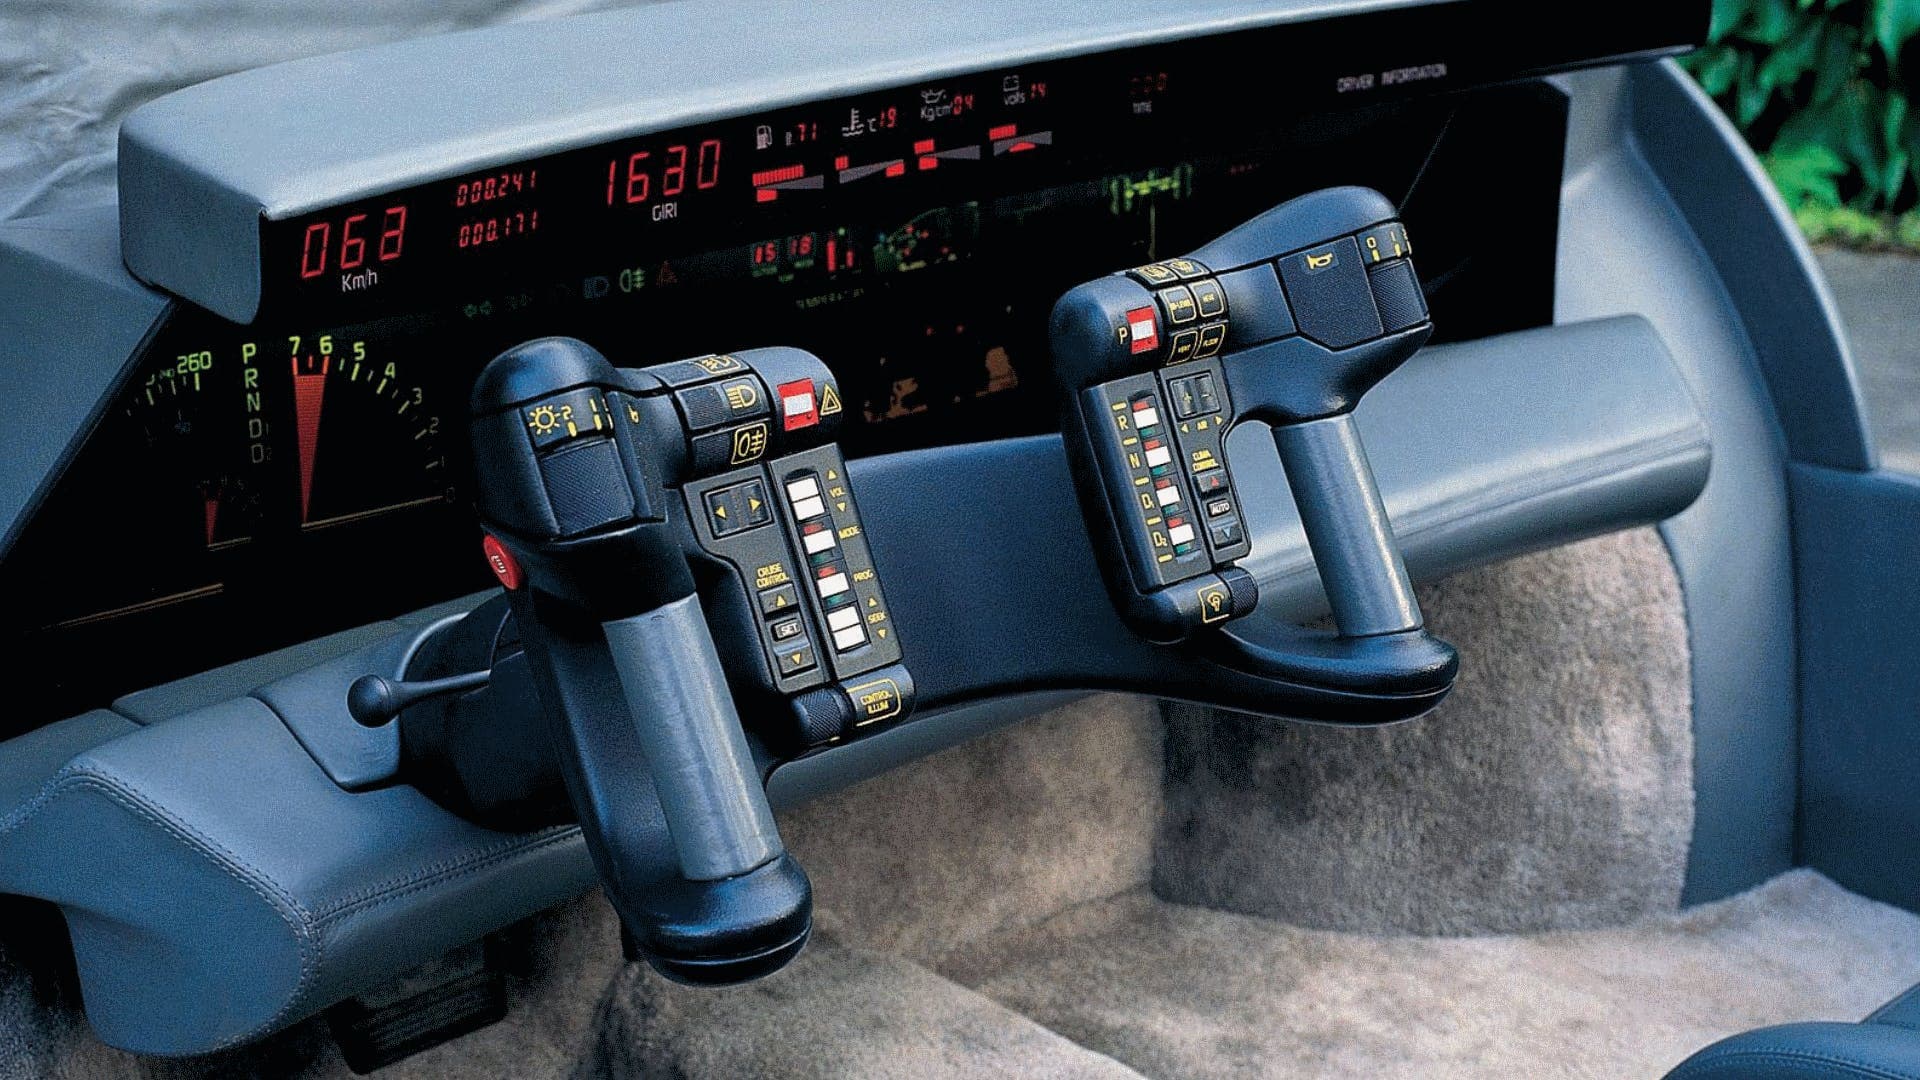 We’re Partnering With Virtual Radwood This Weekend to Find the Best of 80s and 90s Car Tech